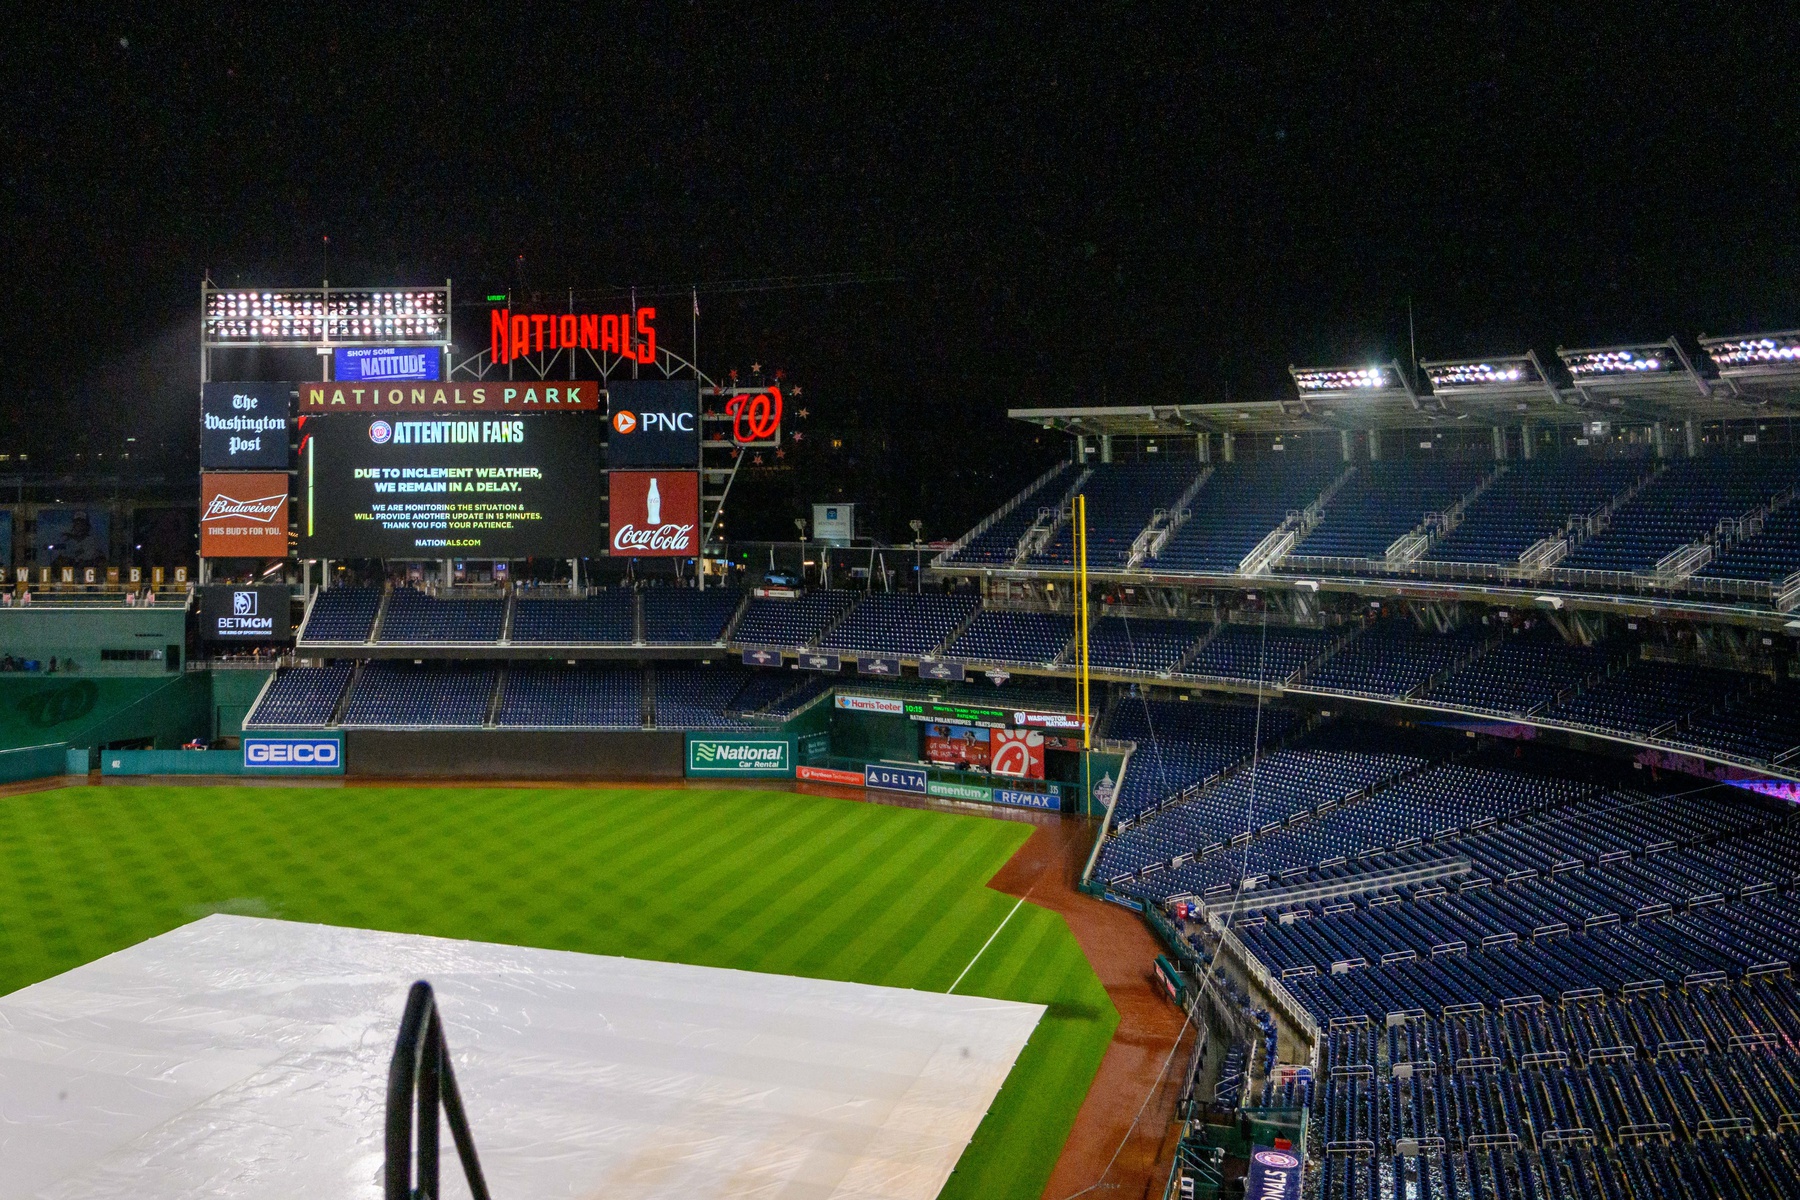 After late rain delay, Nats fall in Flushing (updated) - Blog